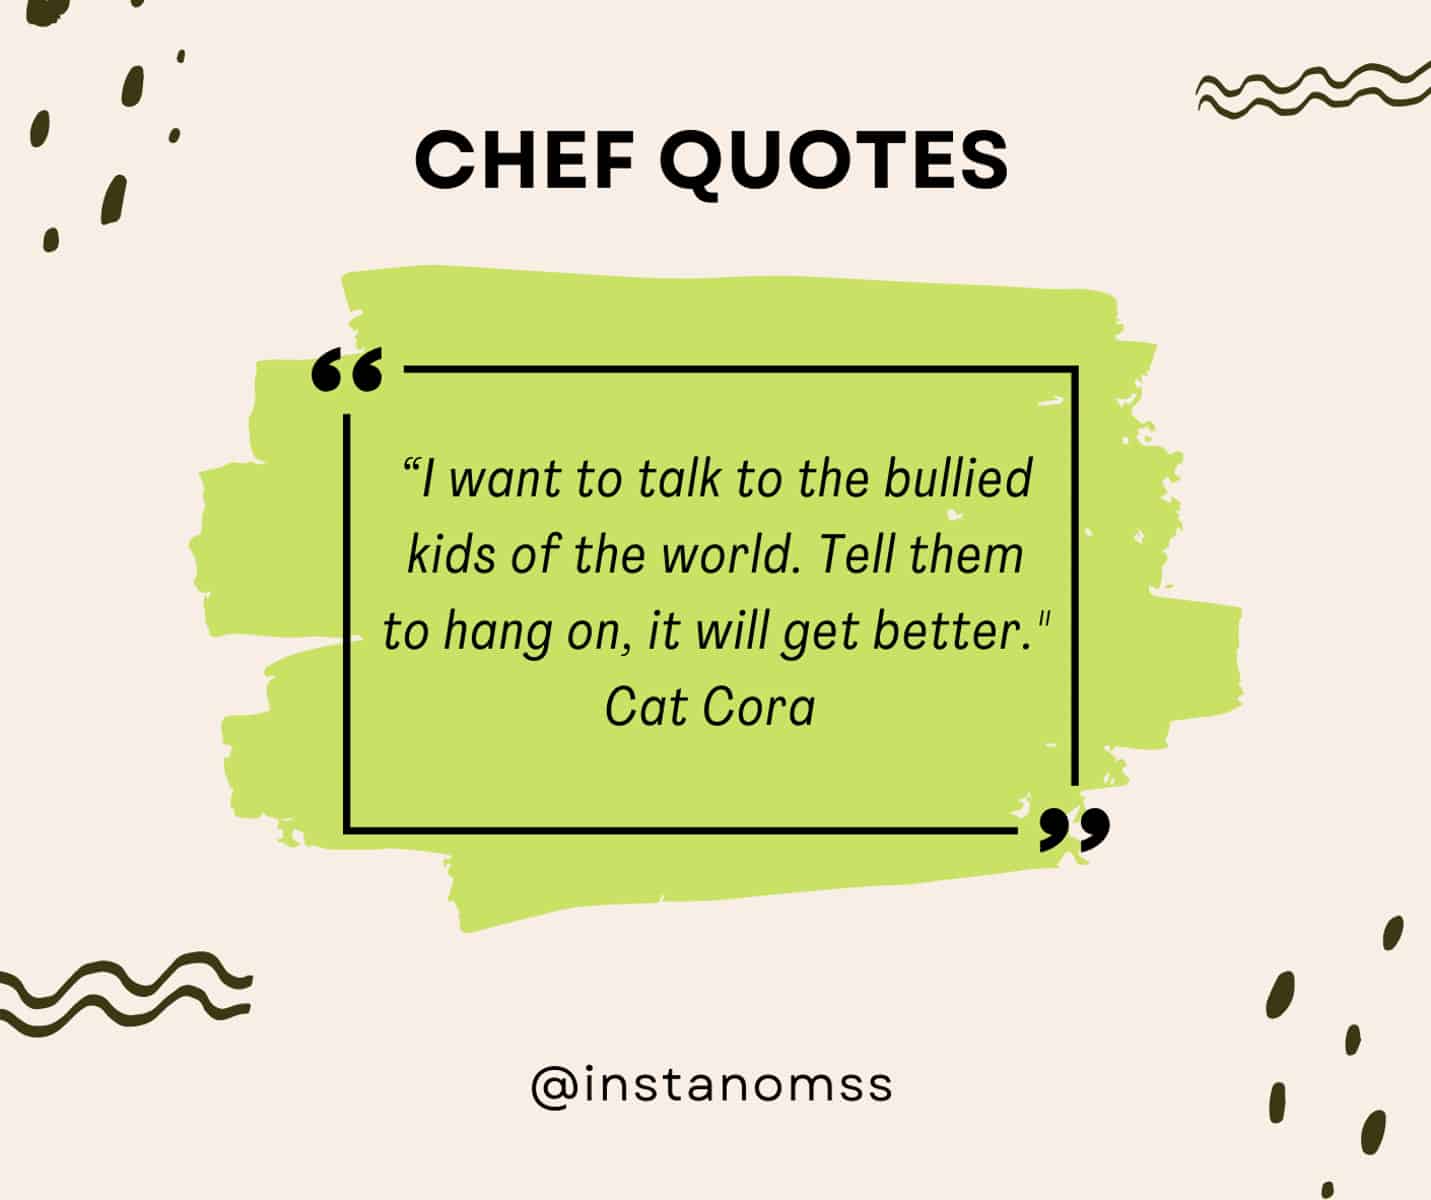 “I want to talk to the bullied kids of the world. Tell them to hang on, it will get better. Know that an ‘Iron Chef,’ actors, musicians, artists and all successful people have probably been bullied in their life. And the best part of your life is yet to come. Whatever it takes to live, do it!” Cat Cora